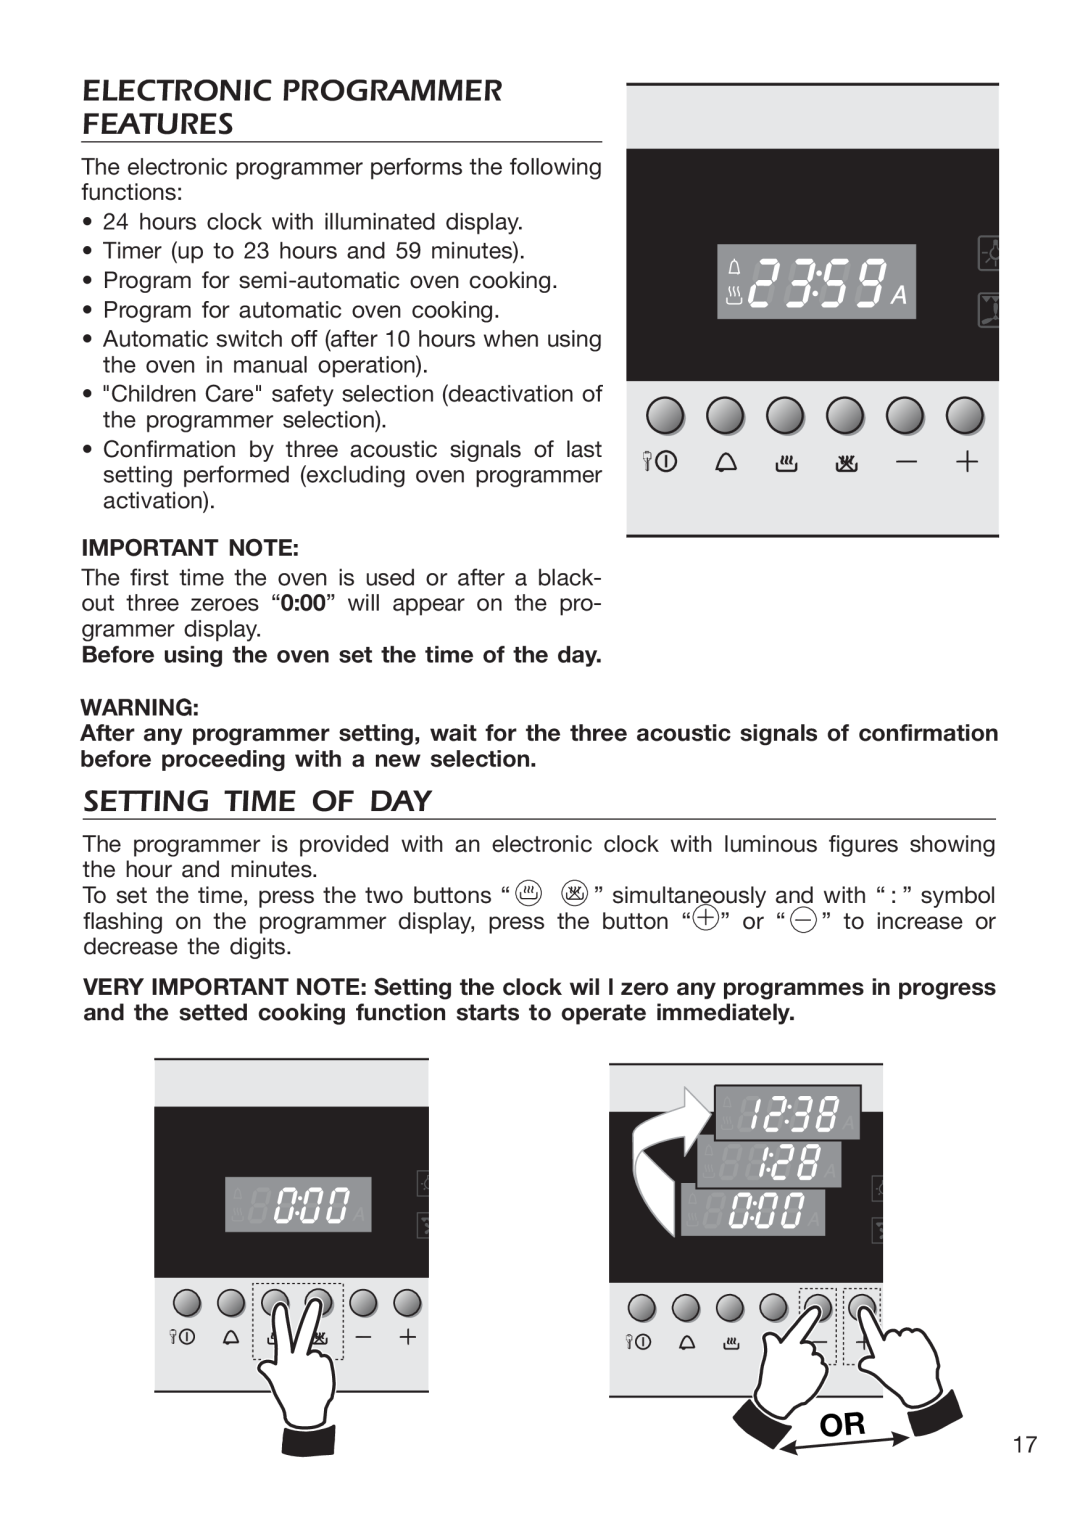 DeLonghi EMFPS 60 B manual Electronic Programmer Features, Setting Time Of Day, Important Note 